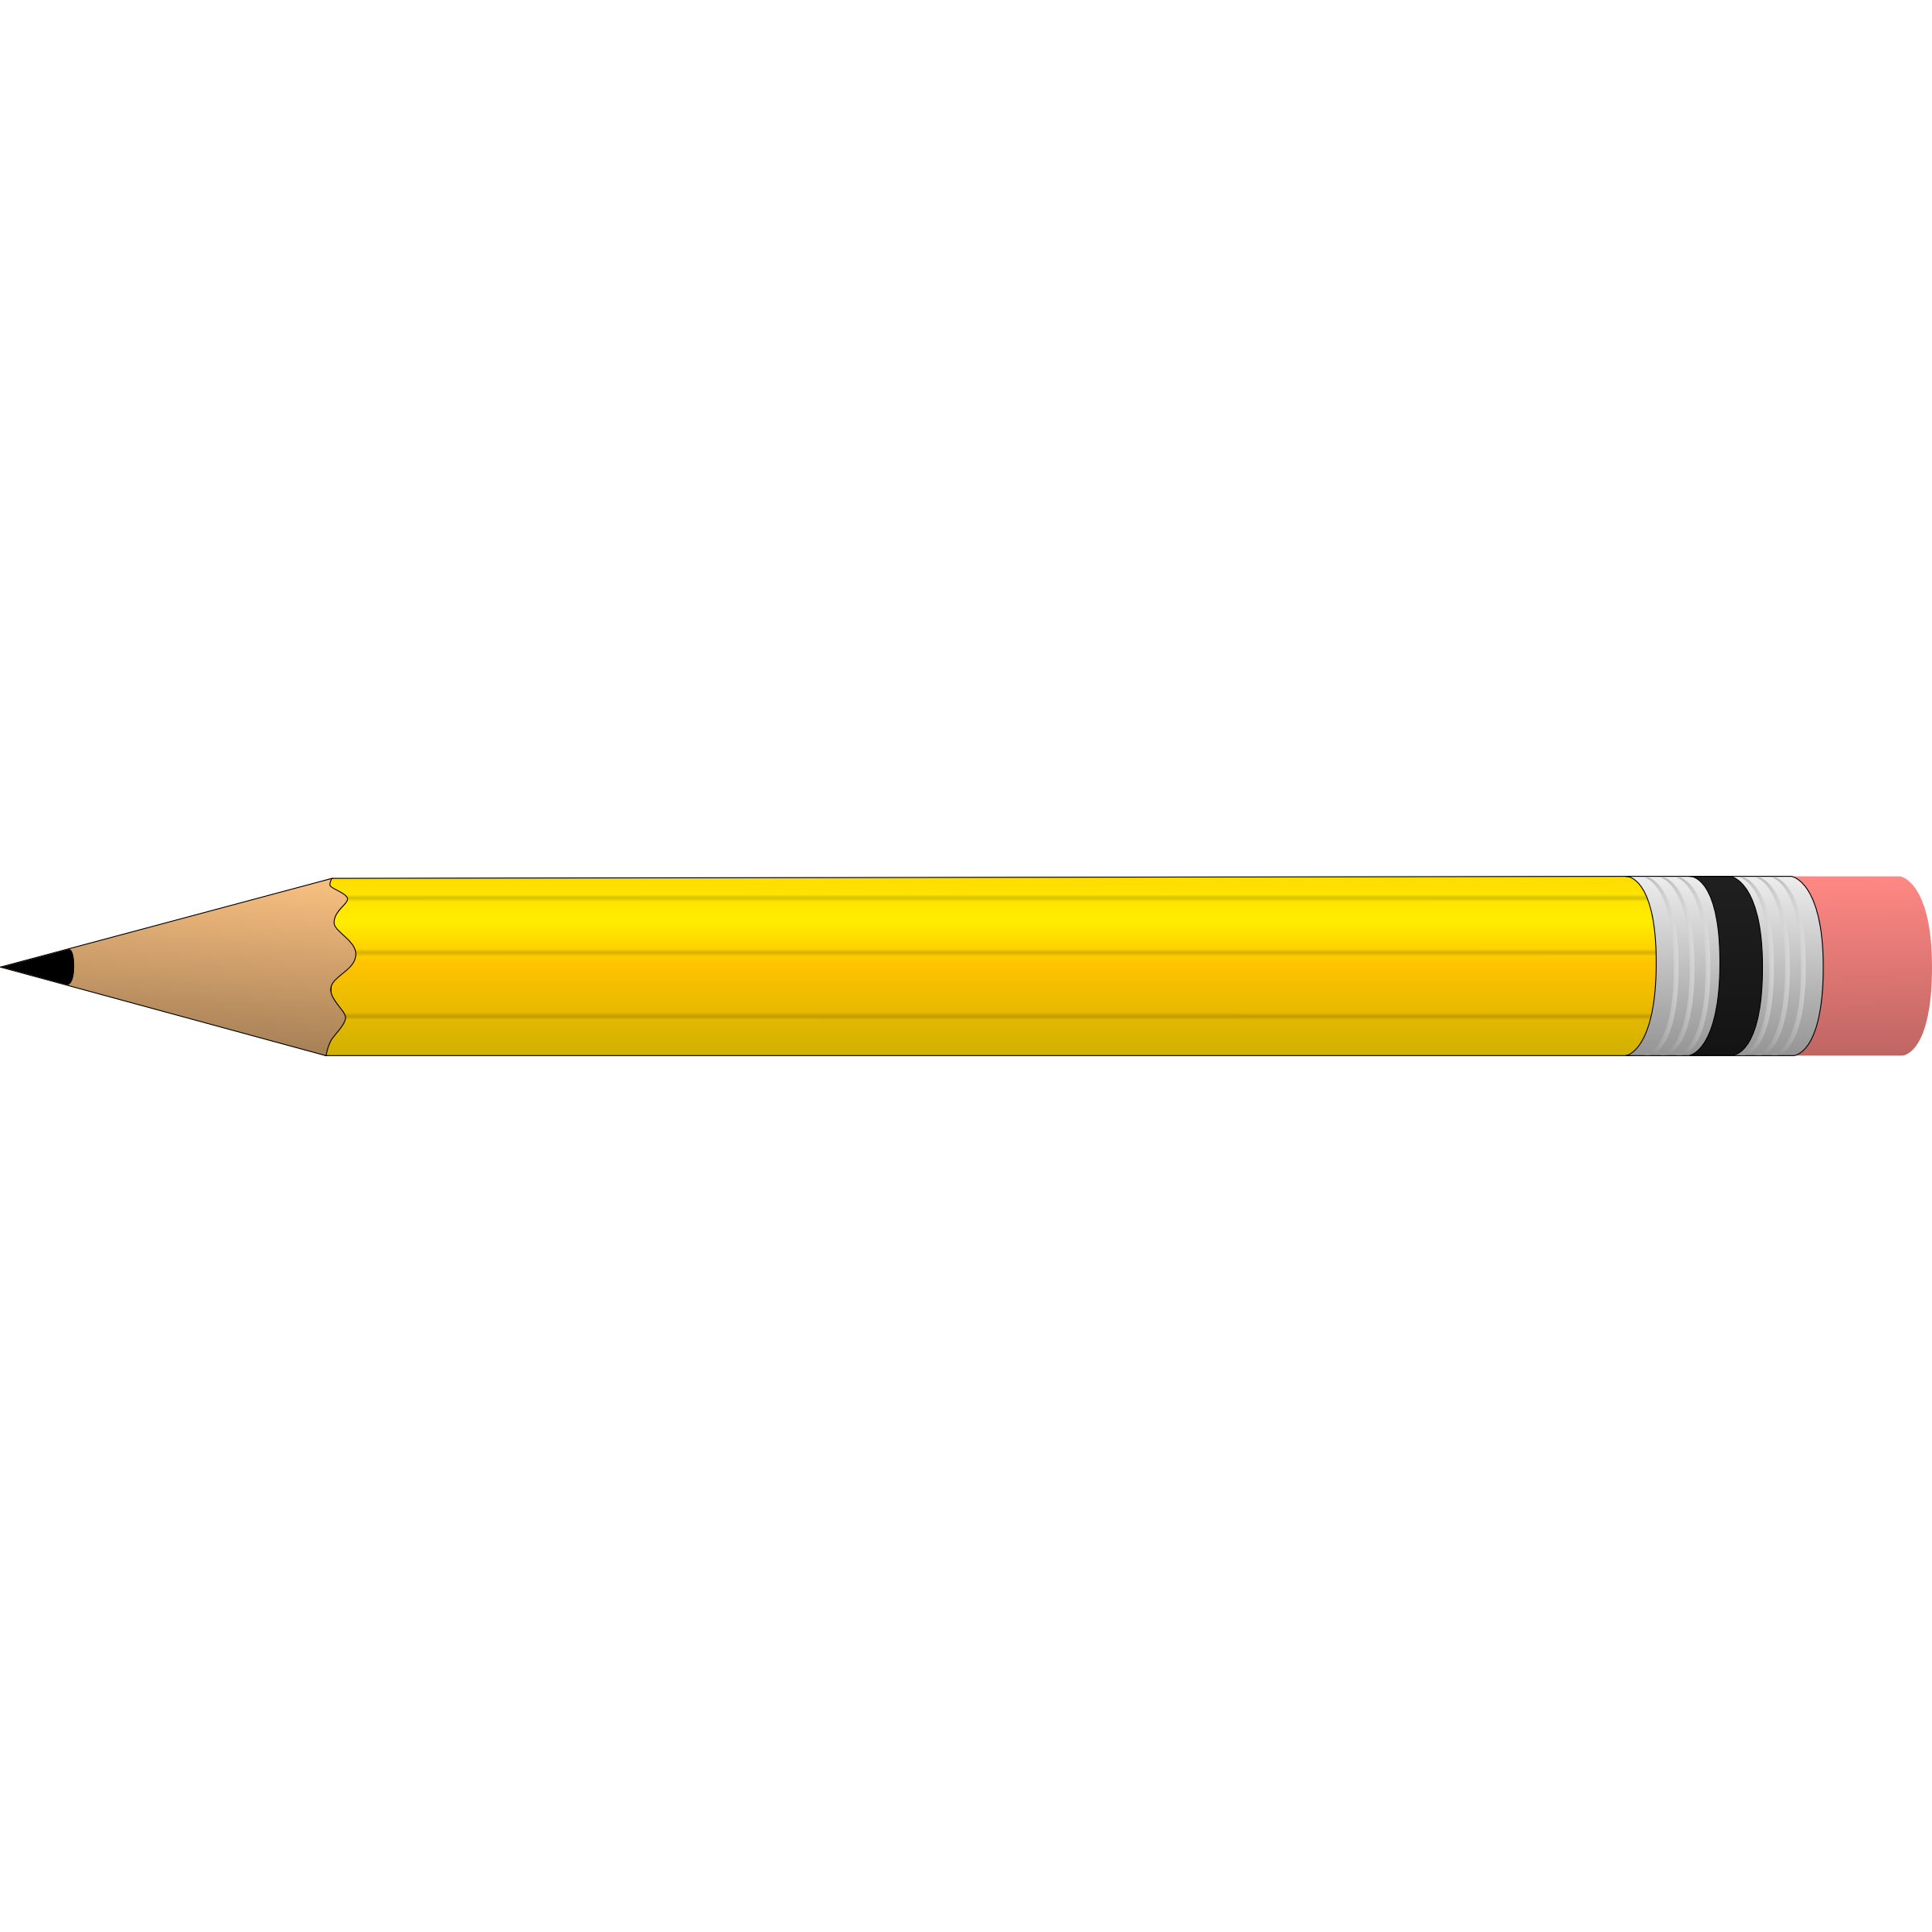 Top pencil for clip art free clipart image